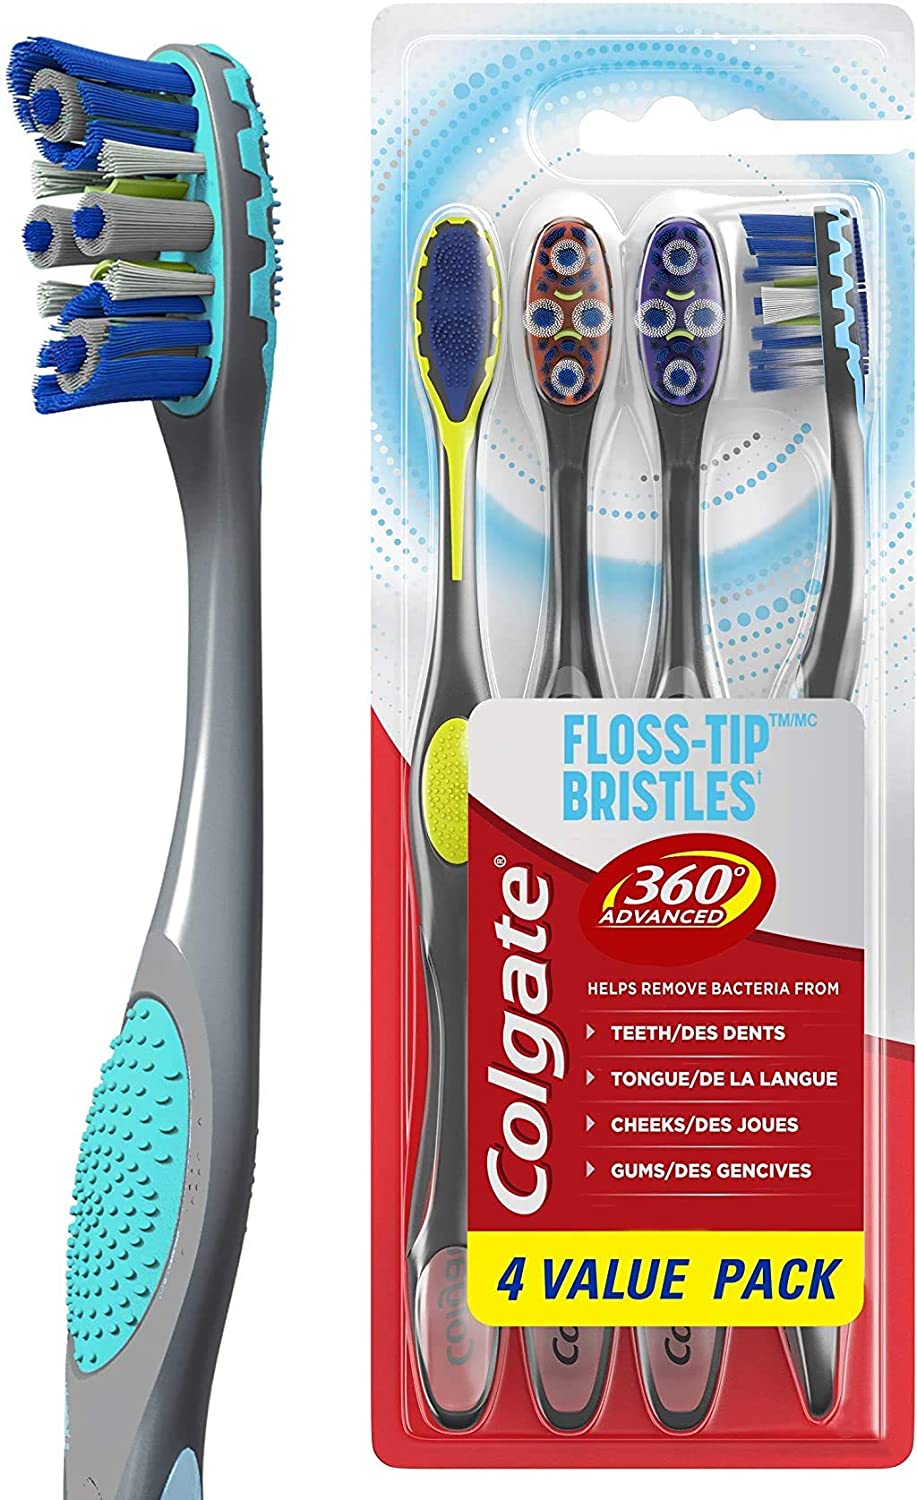 4-Count Colgate 360° Total Advanced Floss-Tip Bristles Toothbrushes (Soft) $3.42 w/ S&S + Free Shipping w/ Prime or $25+